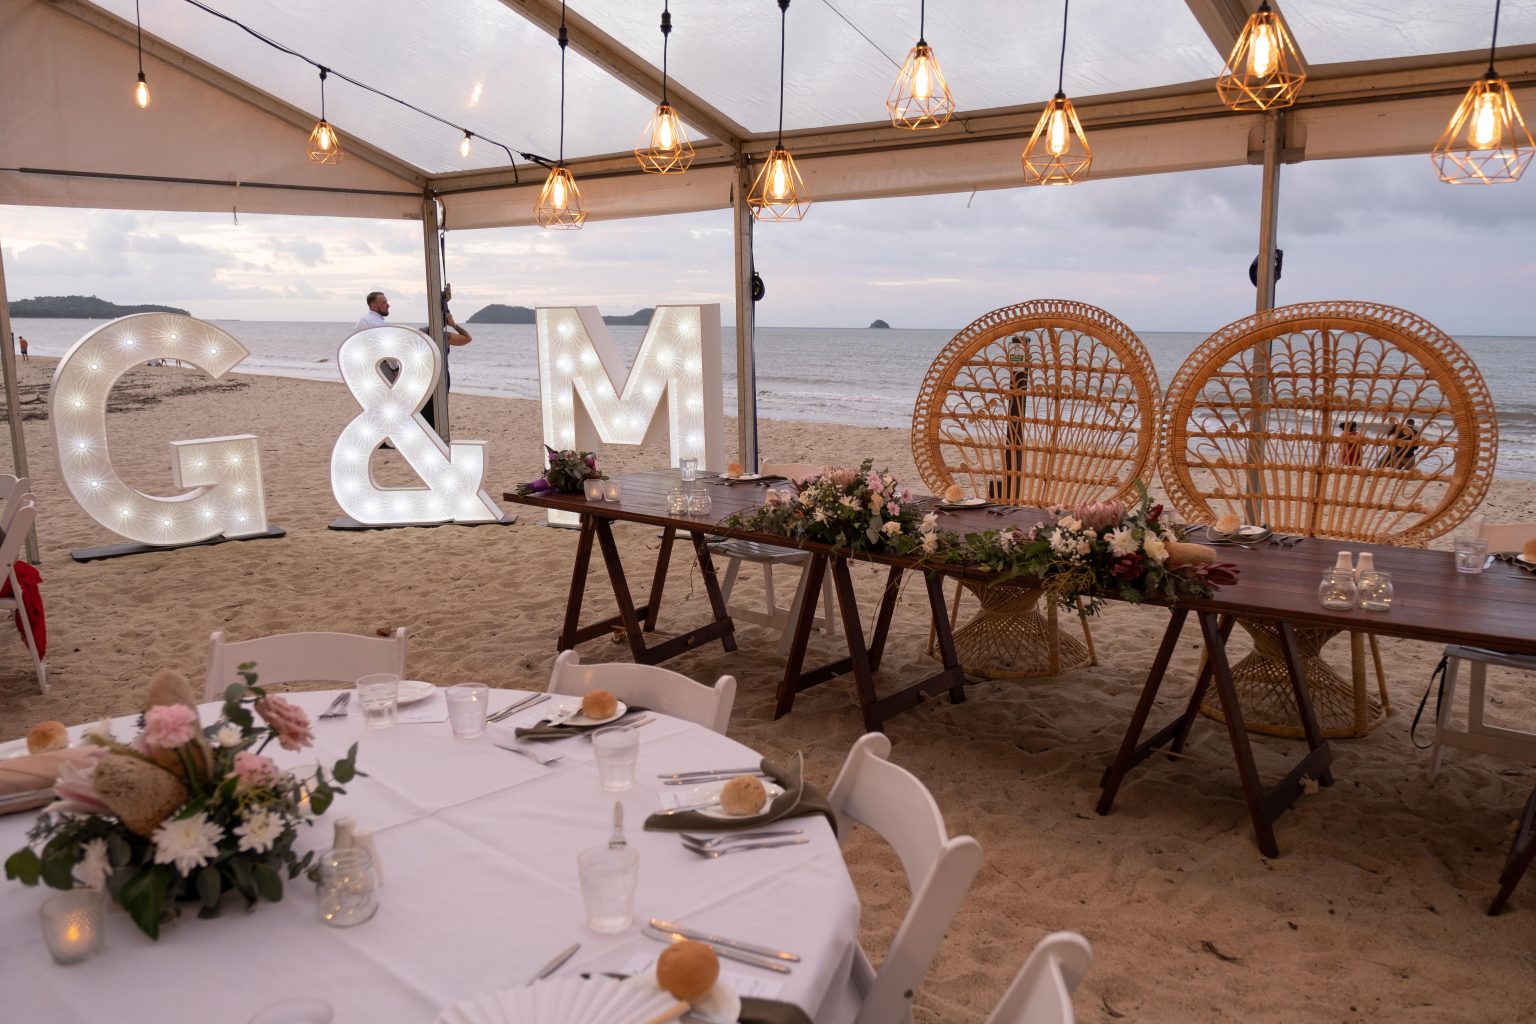 Melaleuca Resort - Palm cove weddings - Bridal table setup on the beach with beautiful flowers and cane chairs